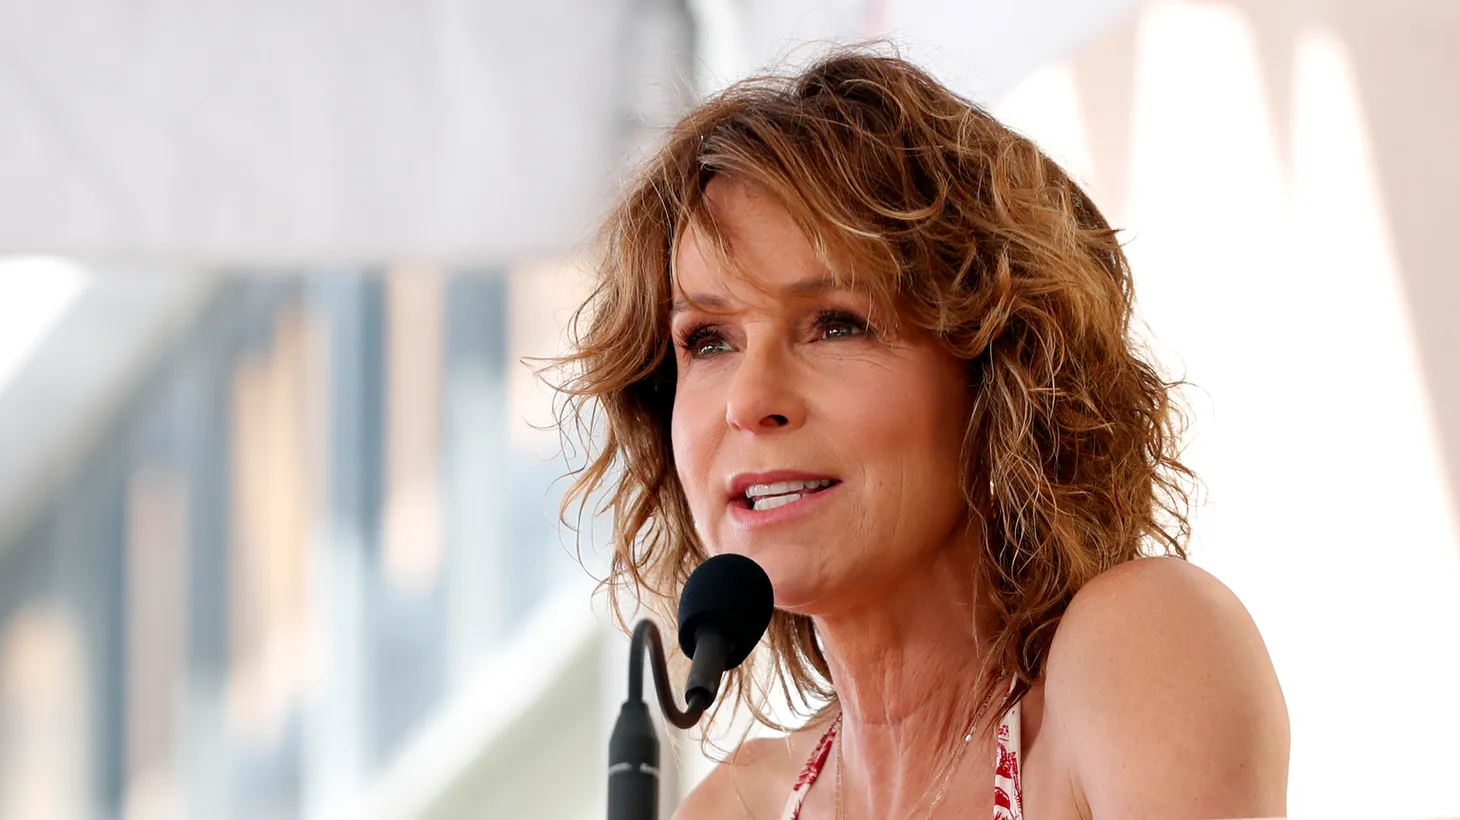 Actor Jennifer Grey speaks before the unveiling of the star for director Kenny Ortega on the Hollywood Walk of Fame in Los Angeles, California, U.S., July 24, 2019.